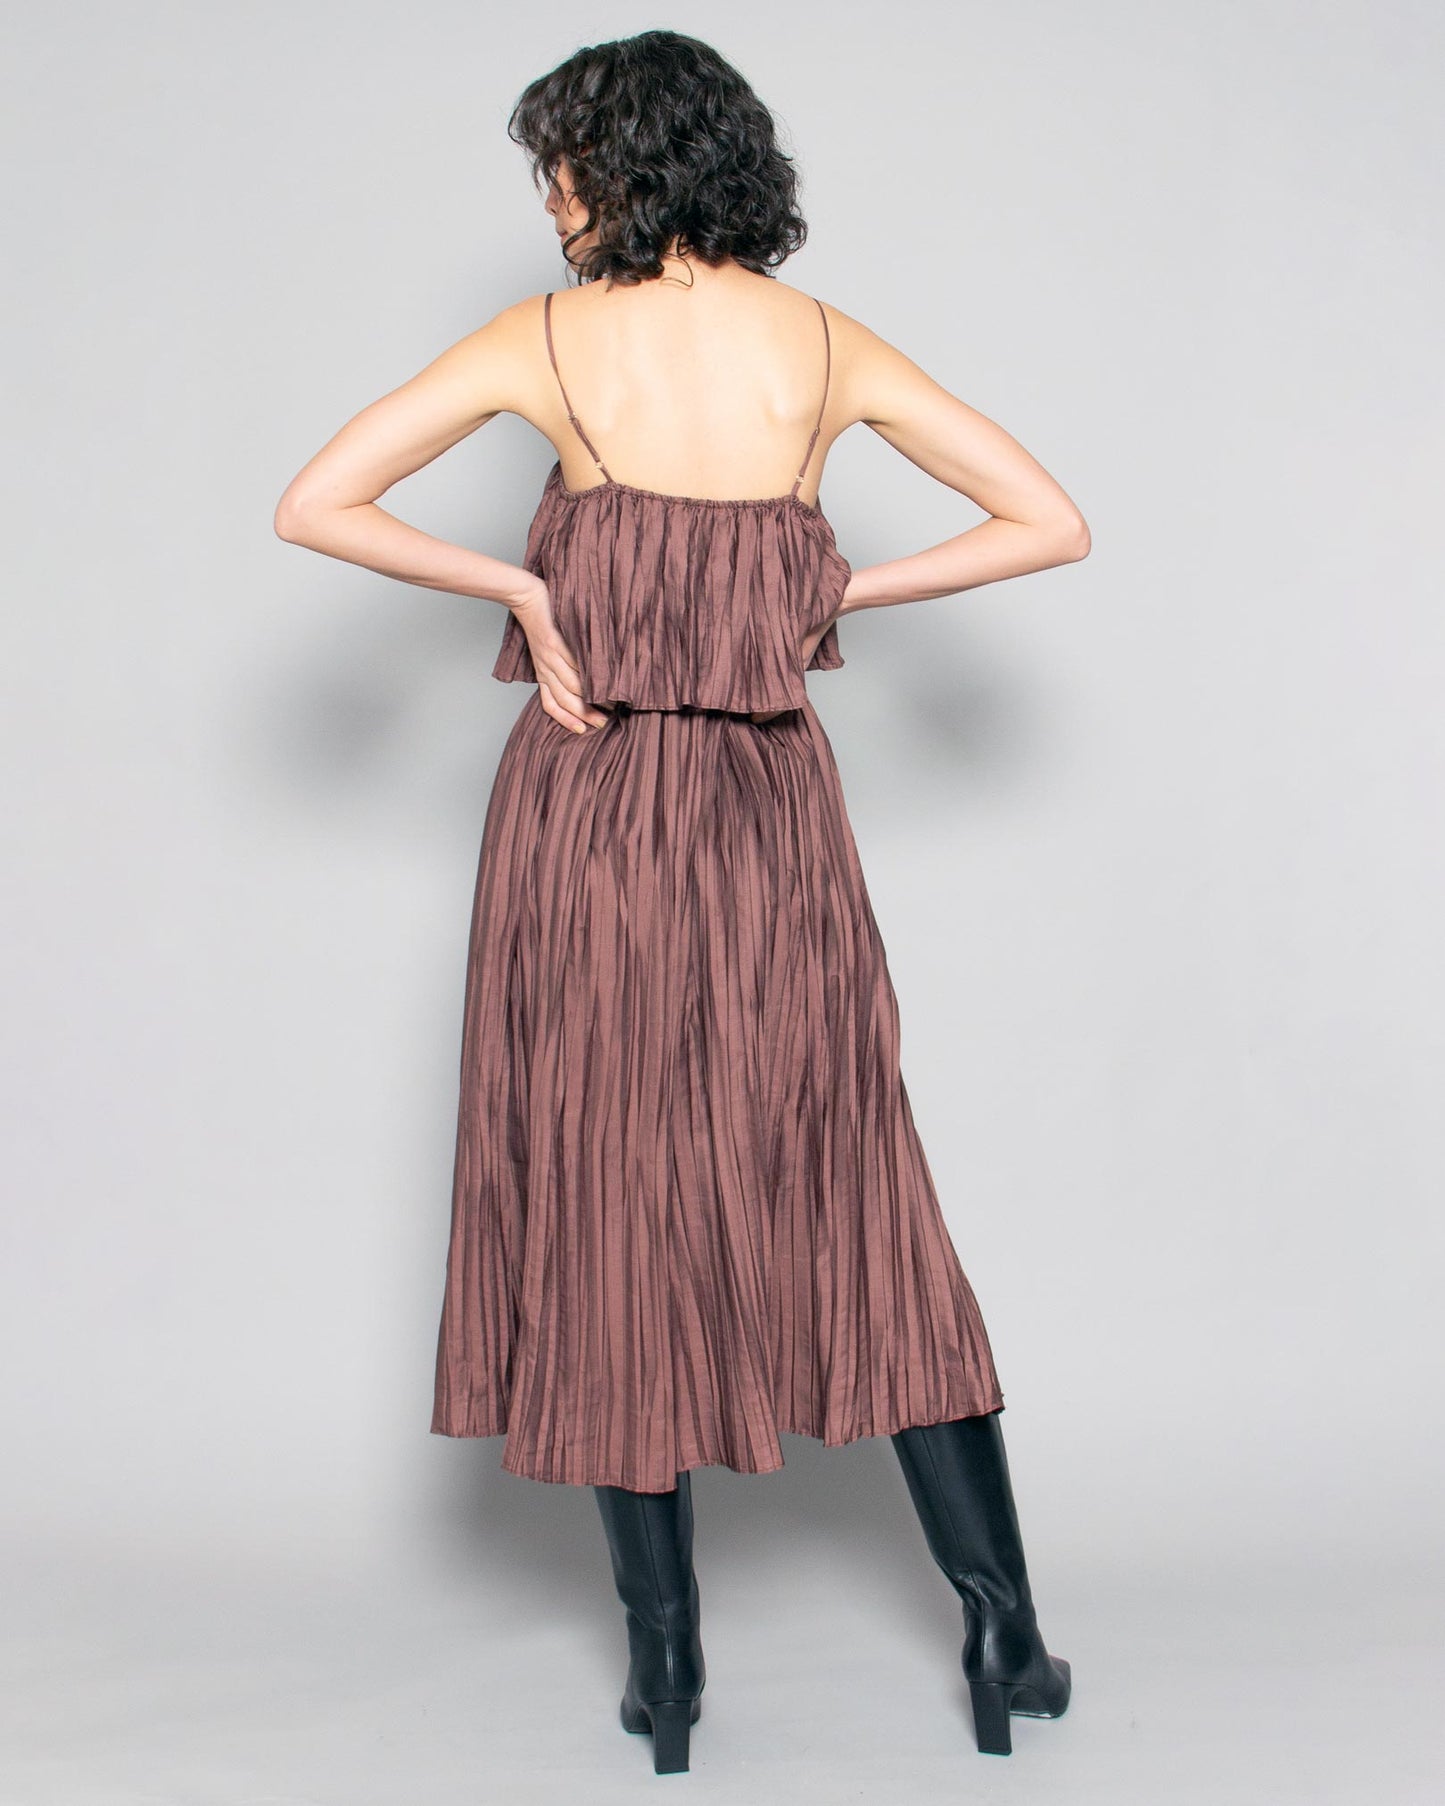 PERSONS Pauline Plisse Pleated Midi Dress in Aubergine available at Lahn.shop